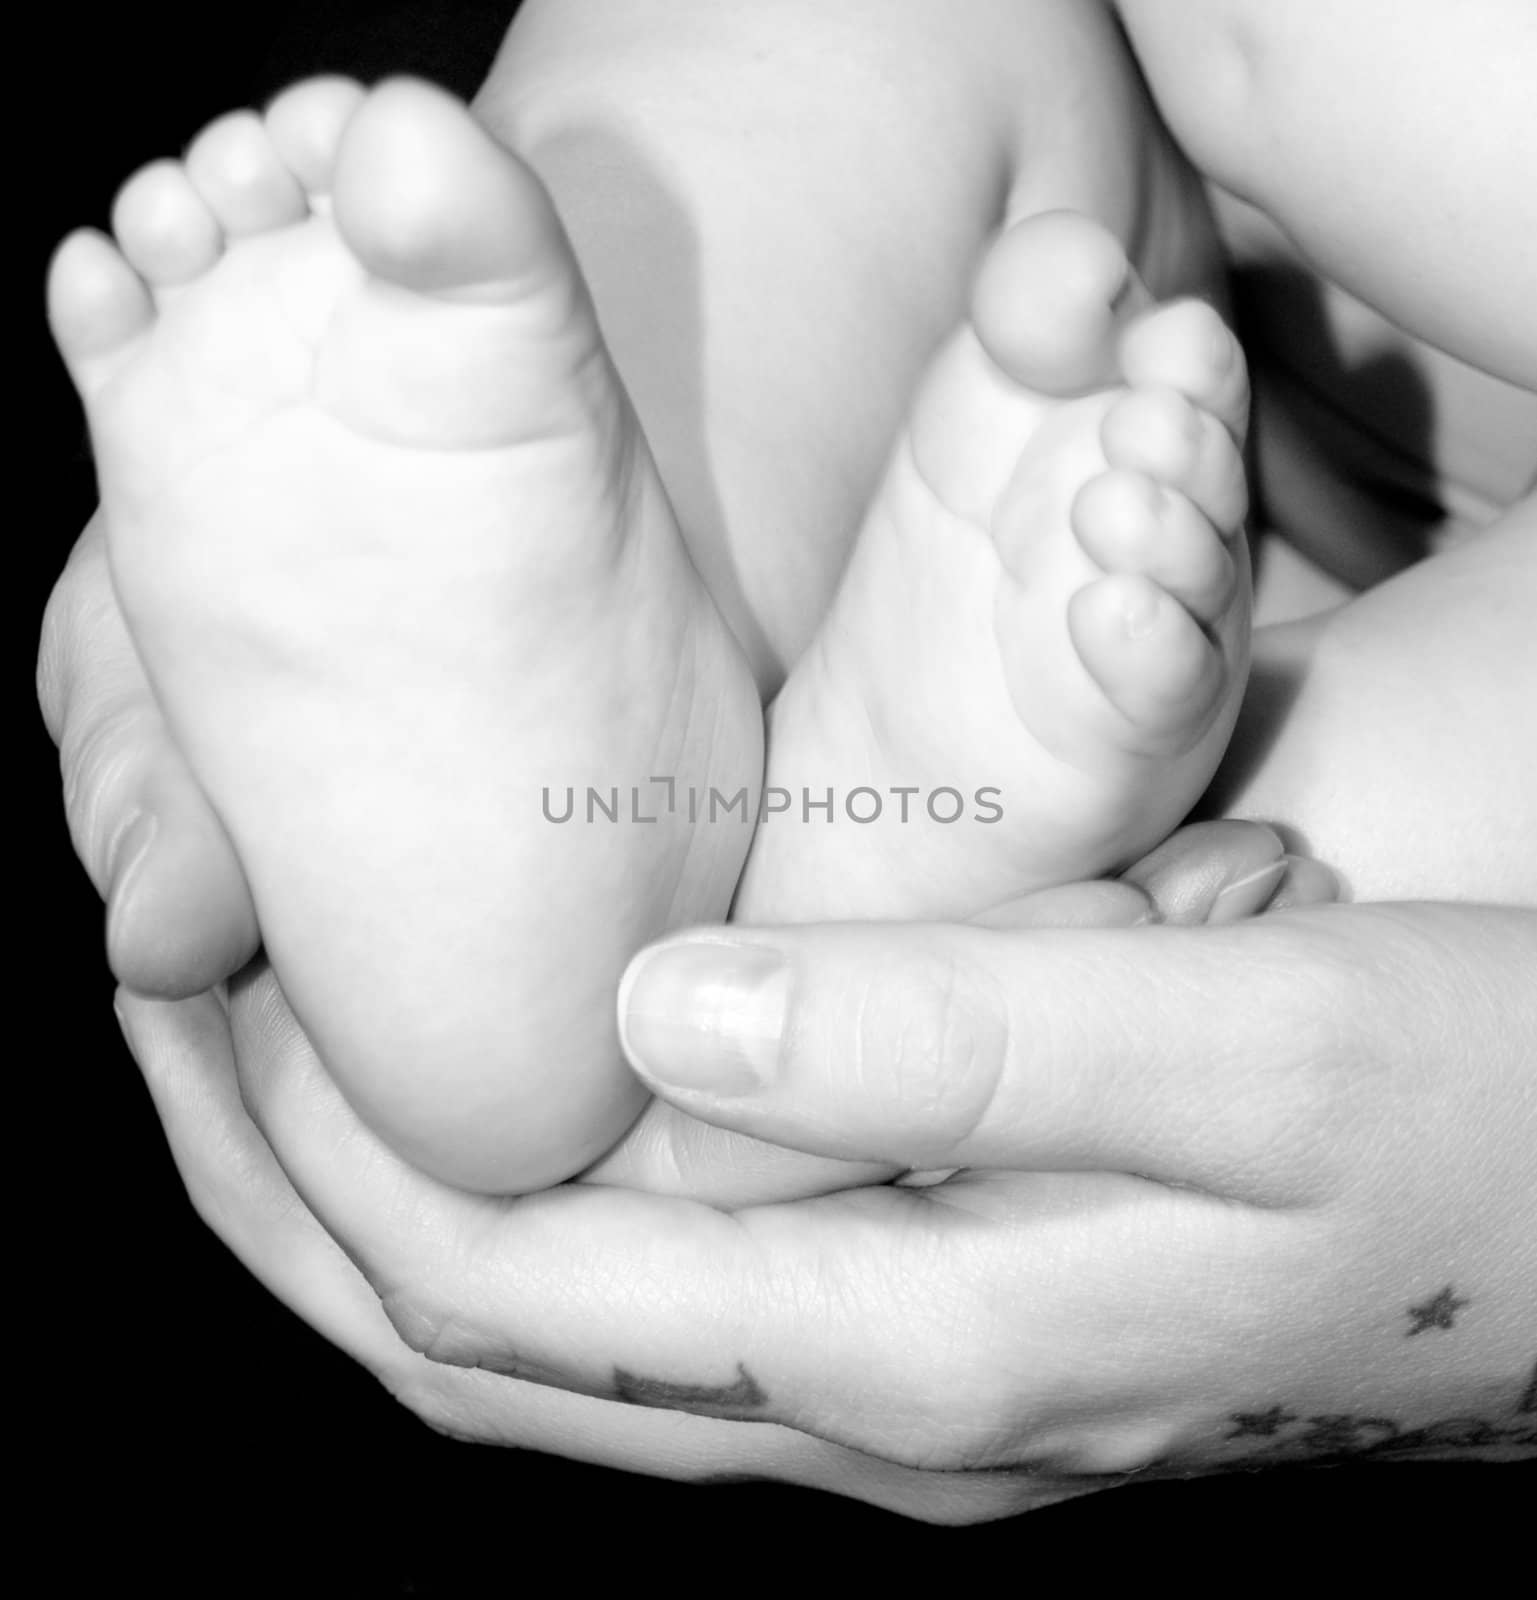 A very cute little infant feet in a mother's hands